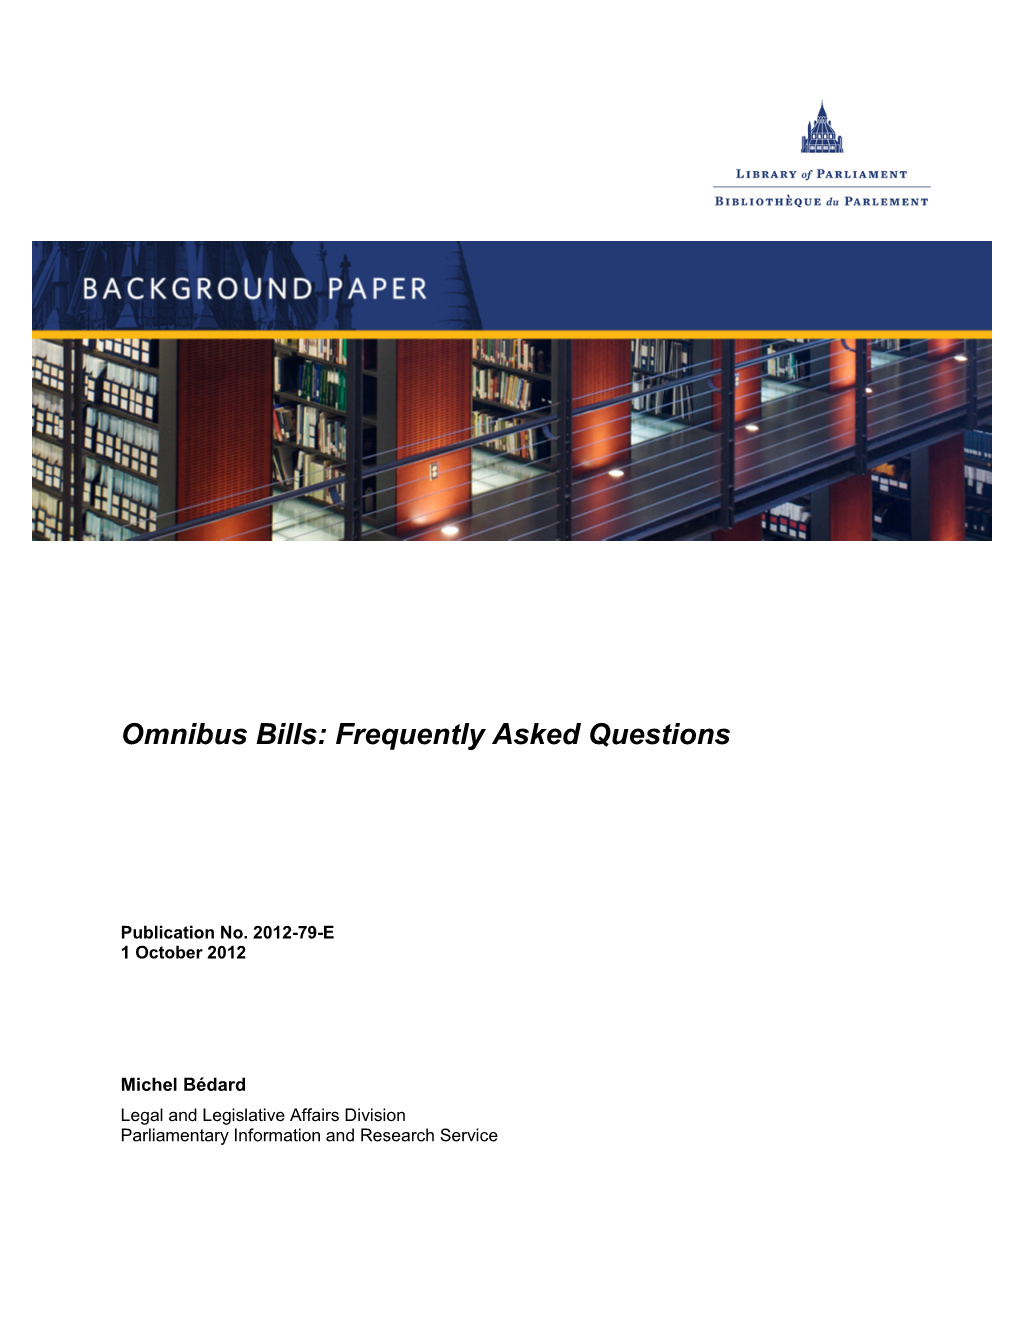 Omnibus Bills: Frequently Asked Questions